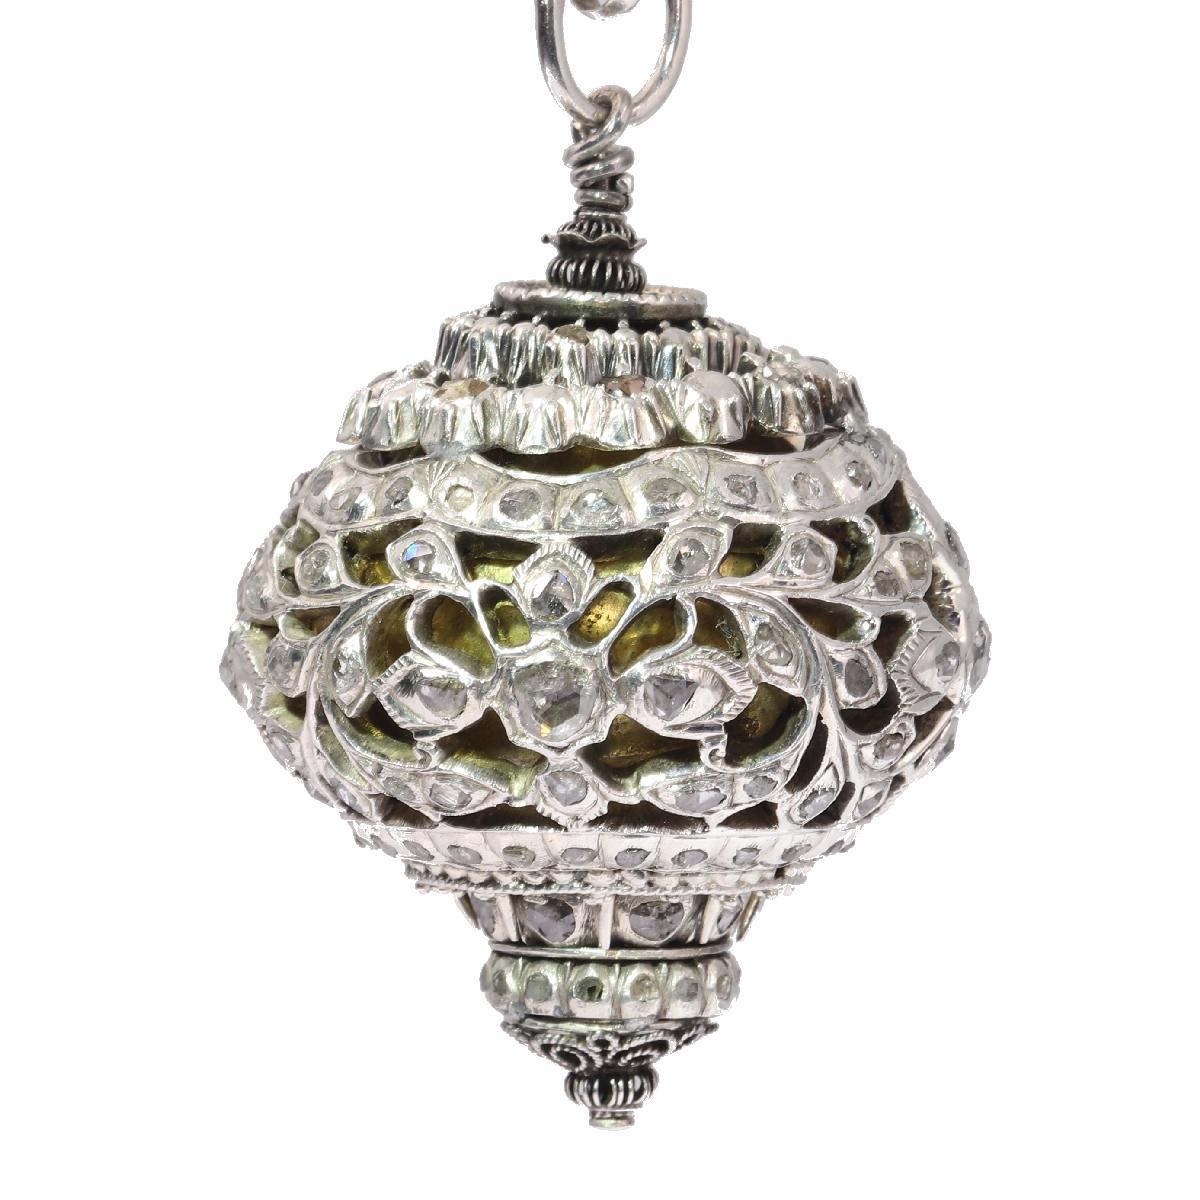 Antique jewelry object group: diamond loaded ball as pendant on an antique silver chain to wear pleasant smelling substances.

Condition: very good condition

Country of origin: unknown

Style: Baroque - Baroque is an artistic style prevalent from